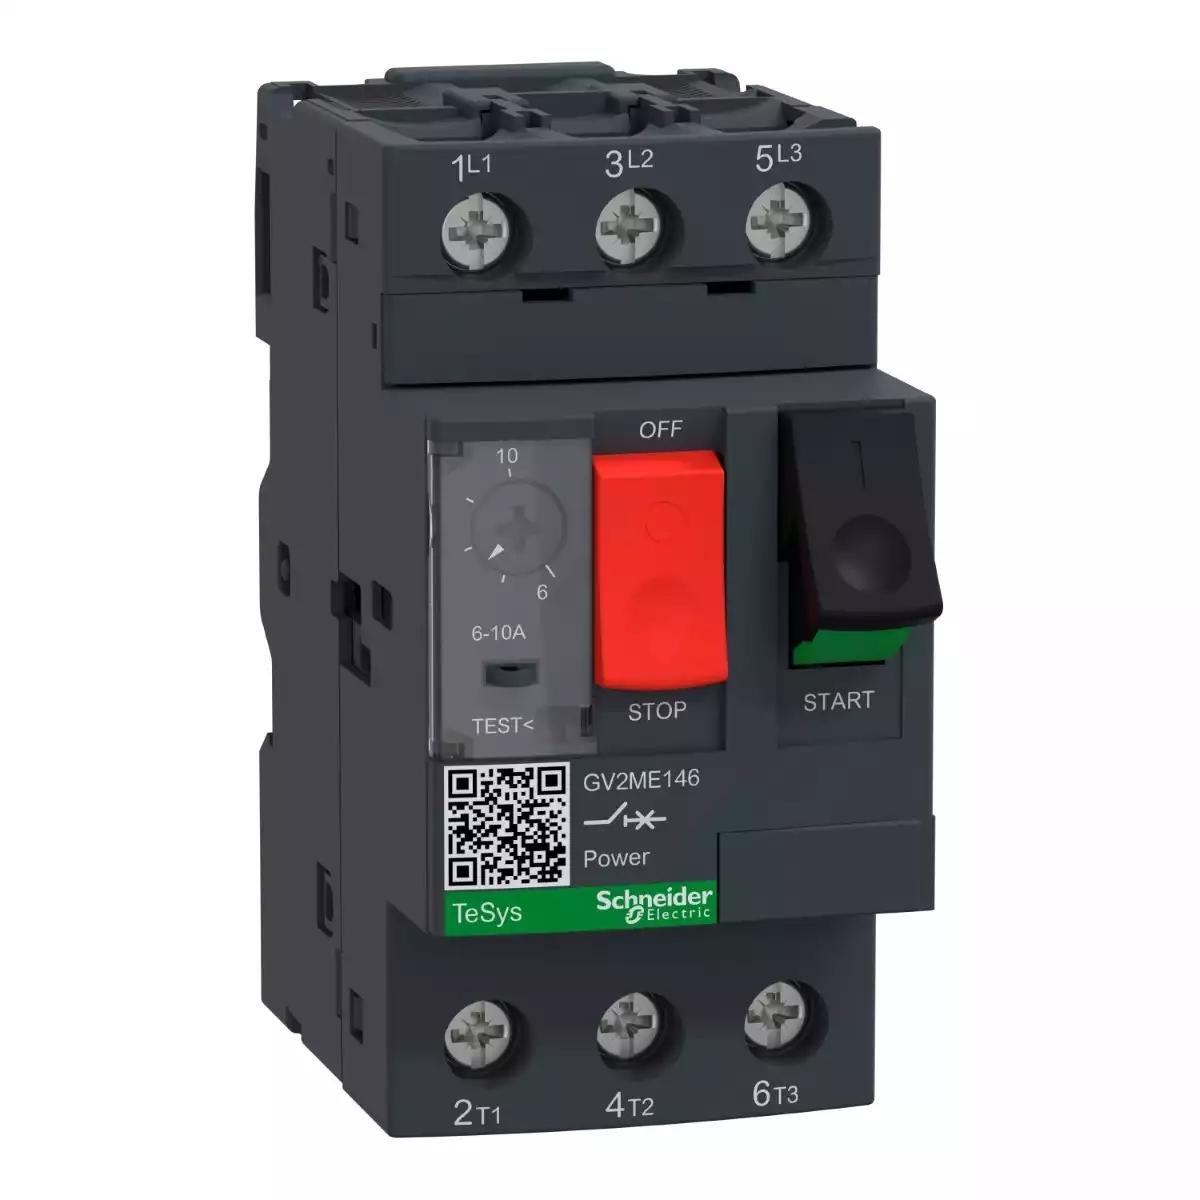 TeSys Deca frame 2, Motor circuit breaker, 3P, 6-10A, Thermal Magnetic, Push Button, Lugs Terminals